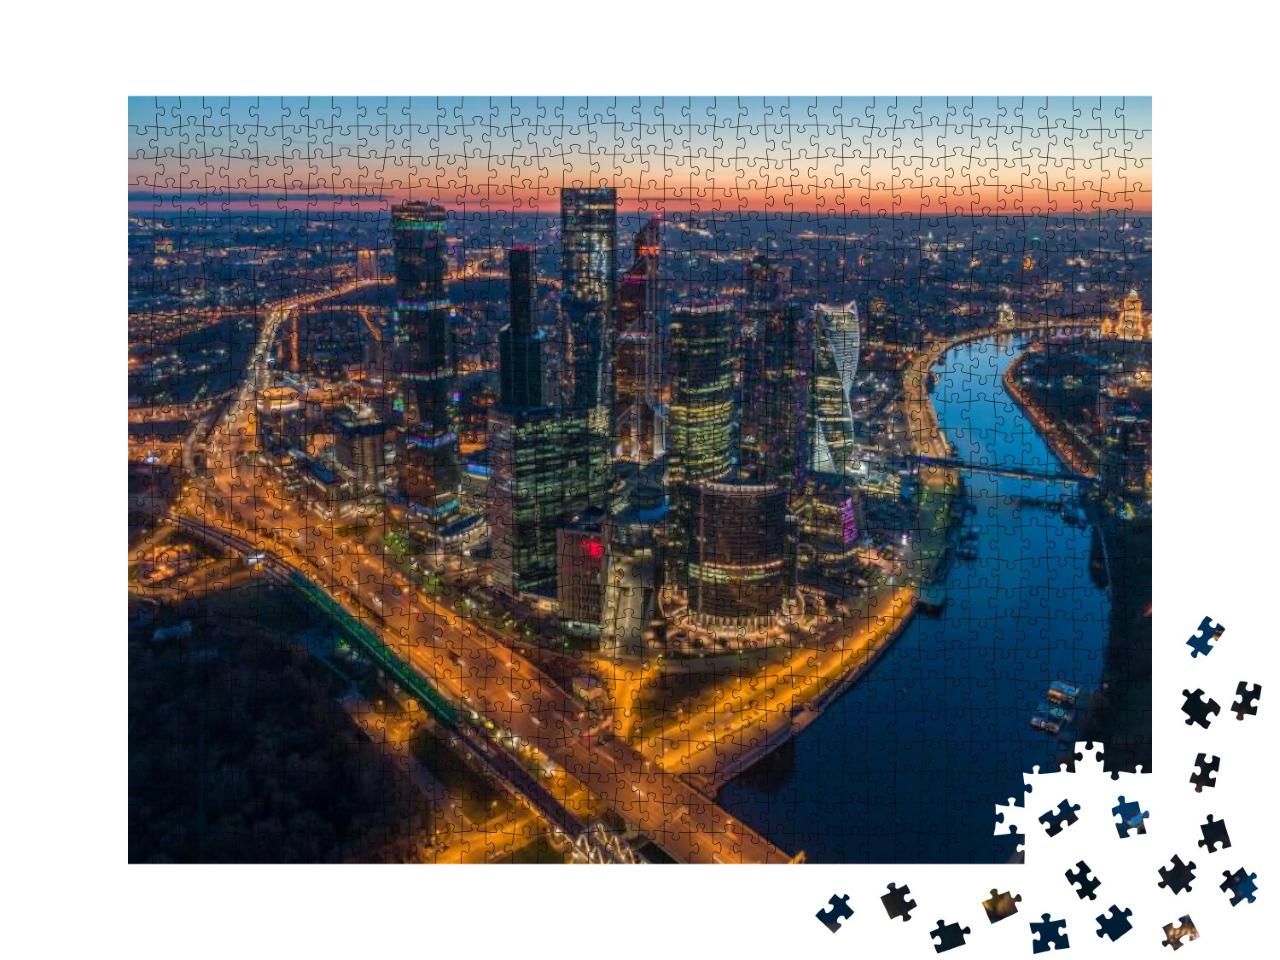 Moscow City International Business Center At Twilight & M... Jigsaw Puzzle with 1000 pieces